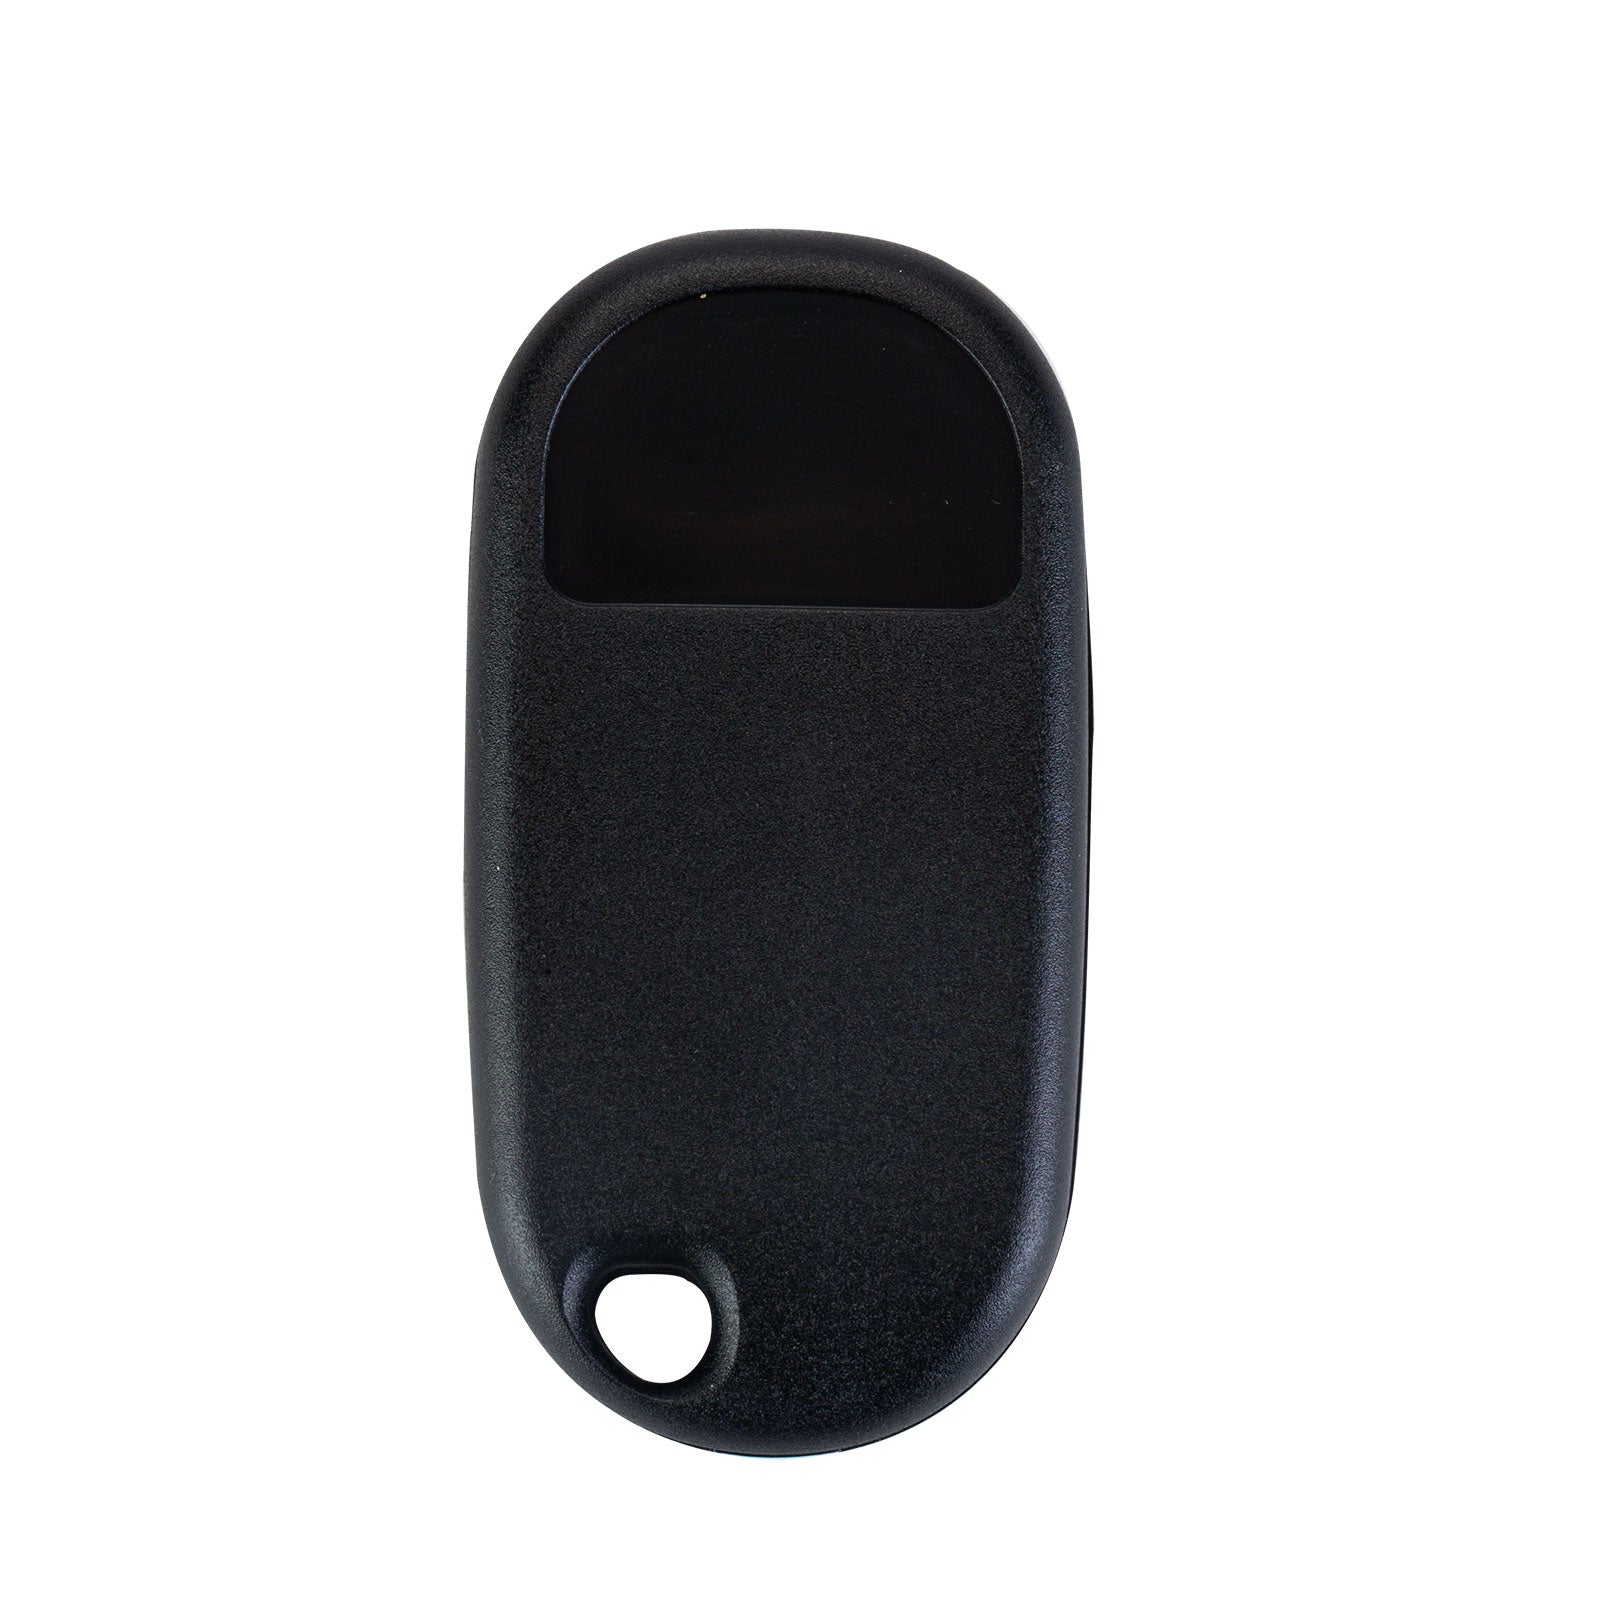 Extra-Partss Remote Car Key Fob Replacement for Honda KOBUTAH2T fits 1998 1999 2000 2001 2002 CR-V 4 Button